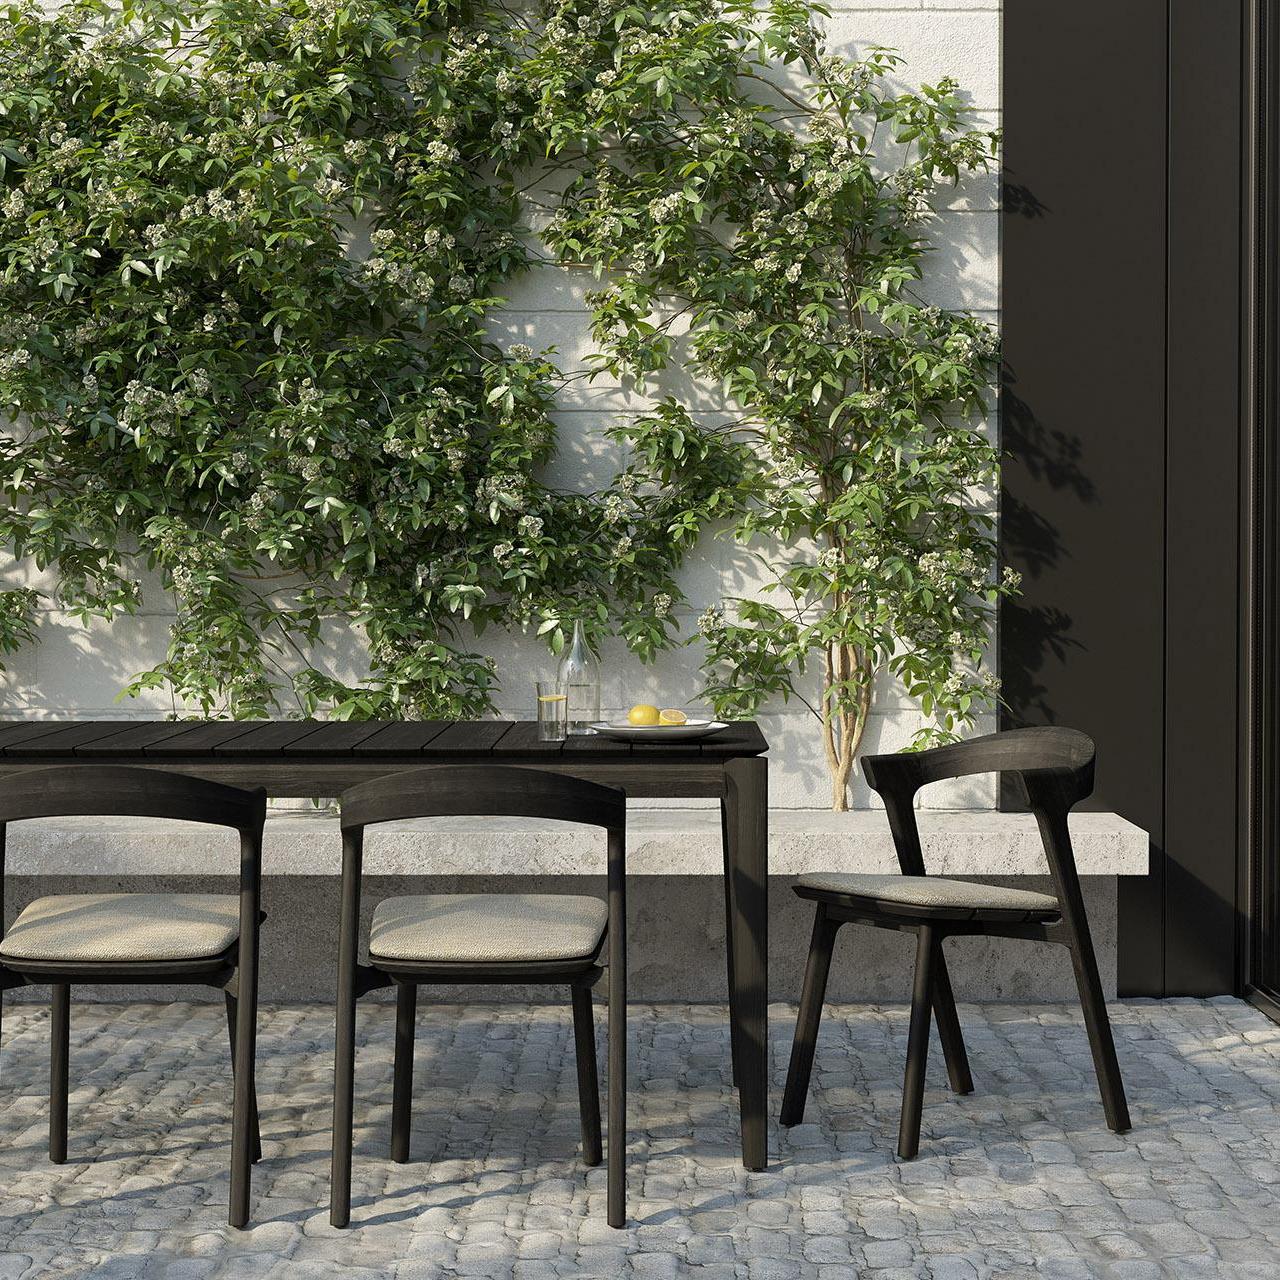 Live Light | Create a new outdoor dining area by renting furniture with Live Light